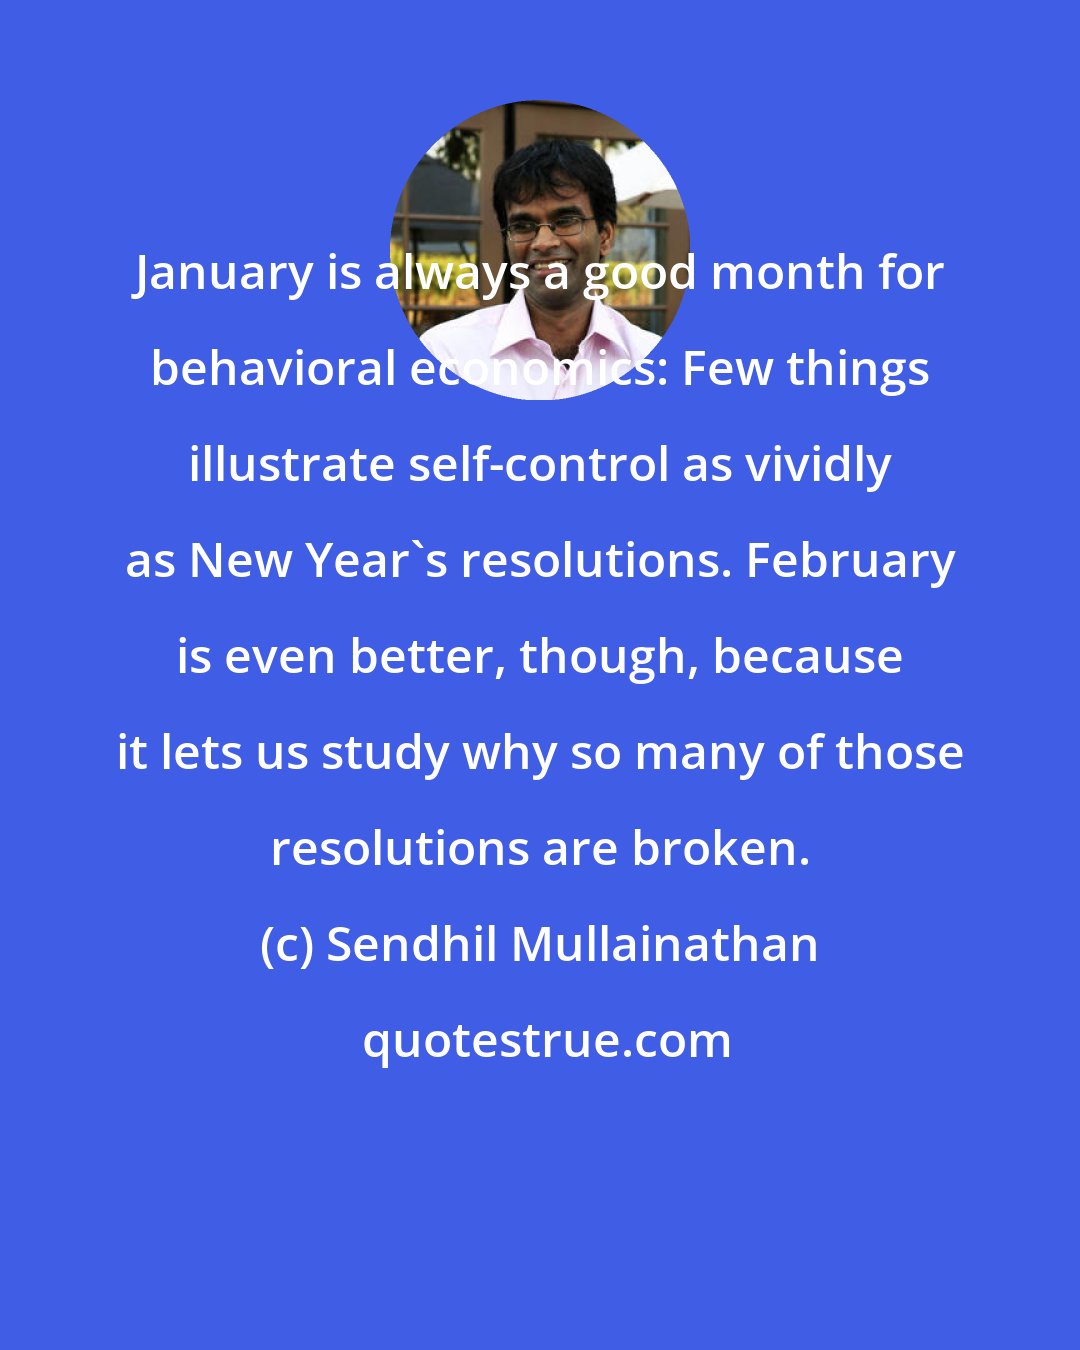 Sendhil Mullainathan: January is always a good month for behavioral economics: Few things illustrate self-control as vividly as New Year's resolutions. February is even better, though, because it lets us study why so many of those resolutions are broken.